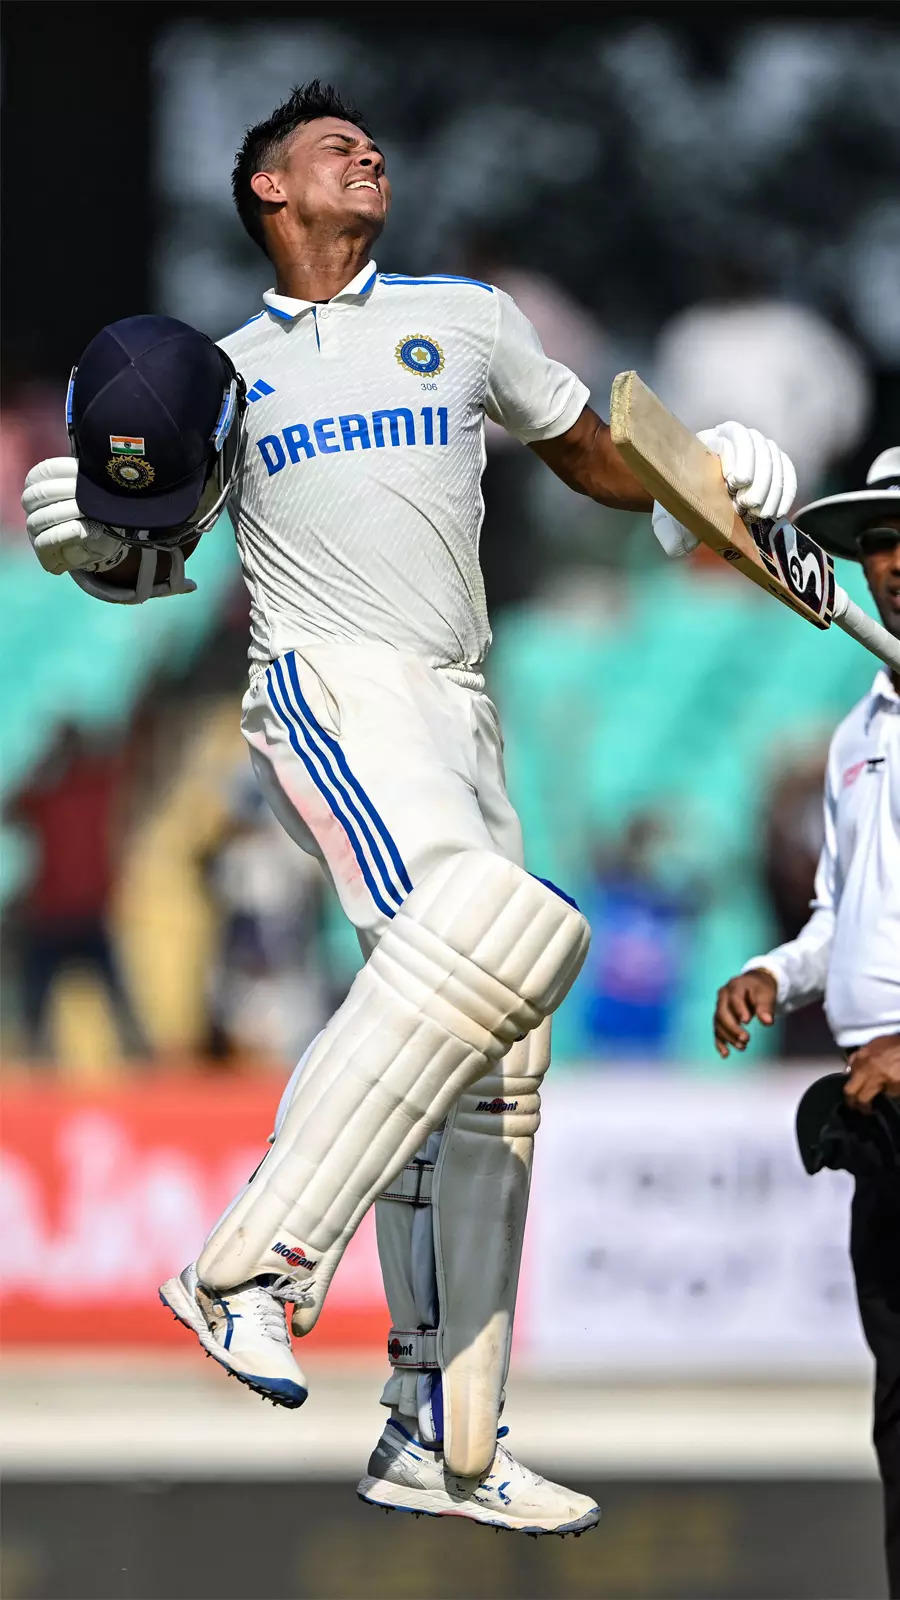 In Pics: Jaiswal's heroic century extends India's lead